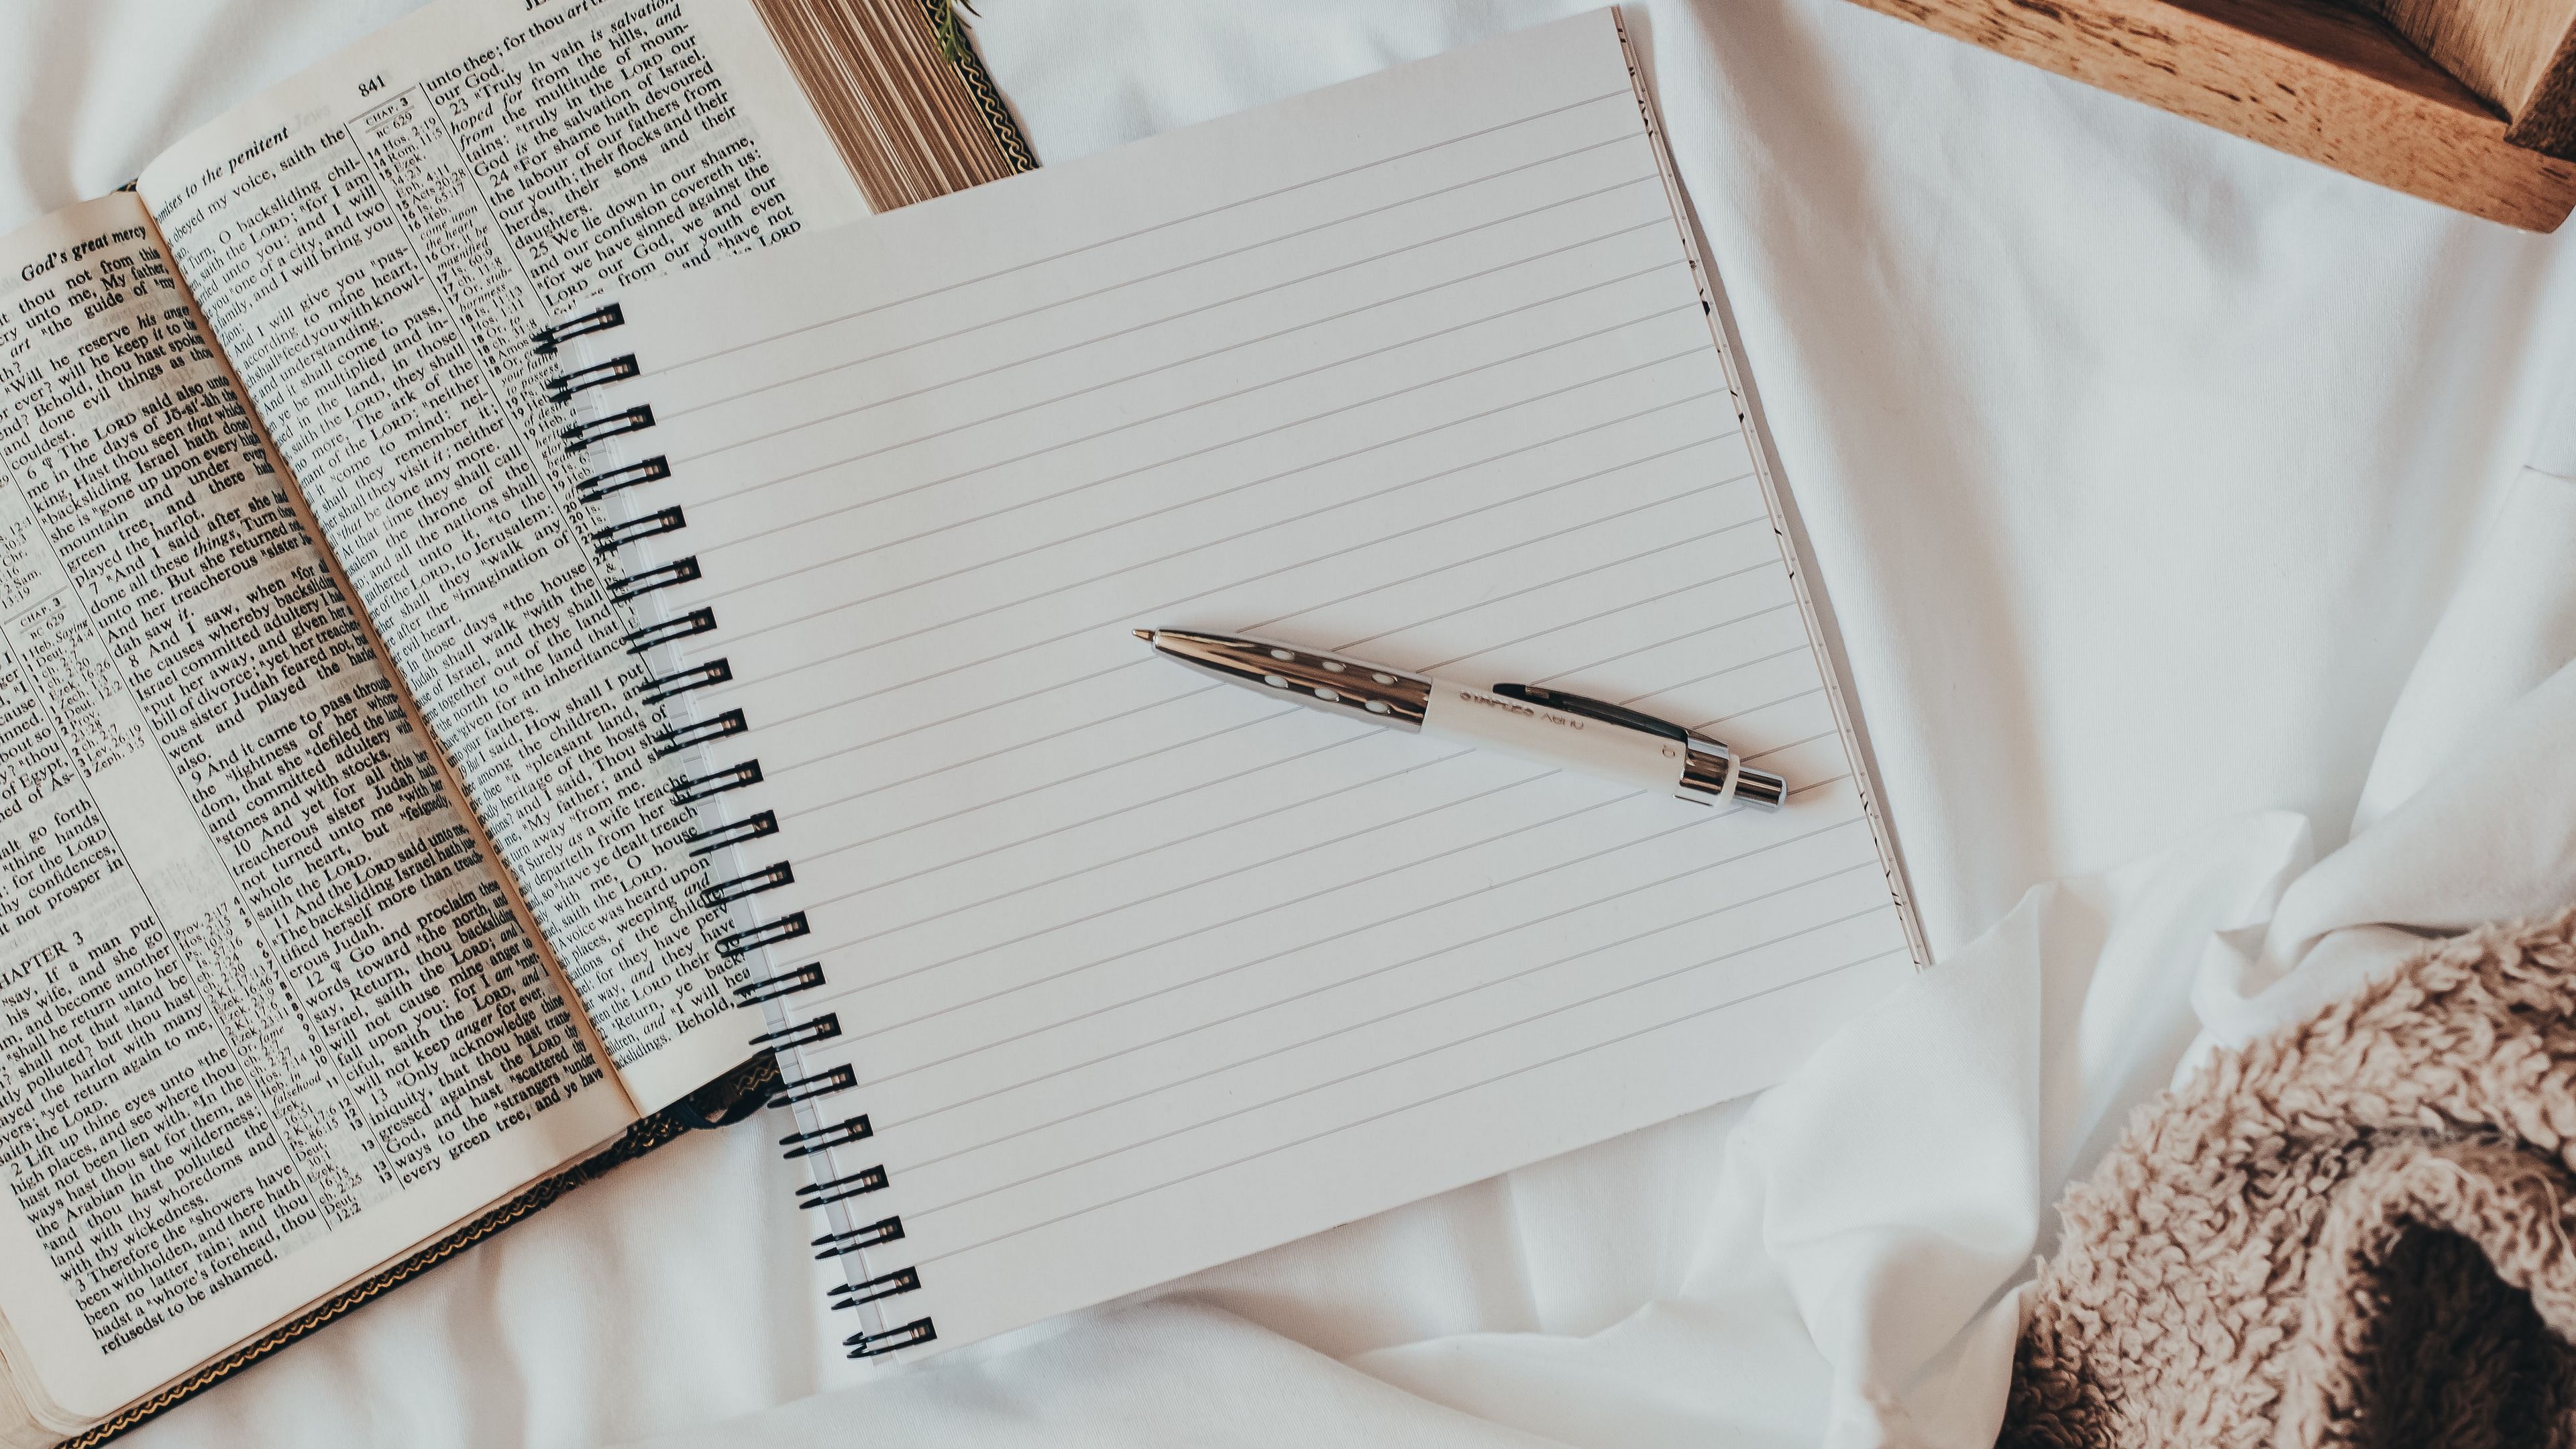 A notebook and pen next to an open bible - Study